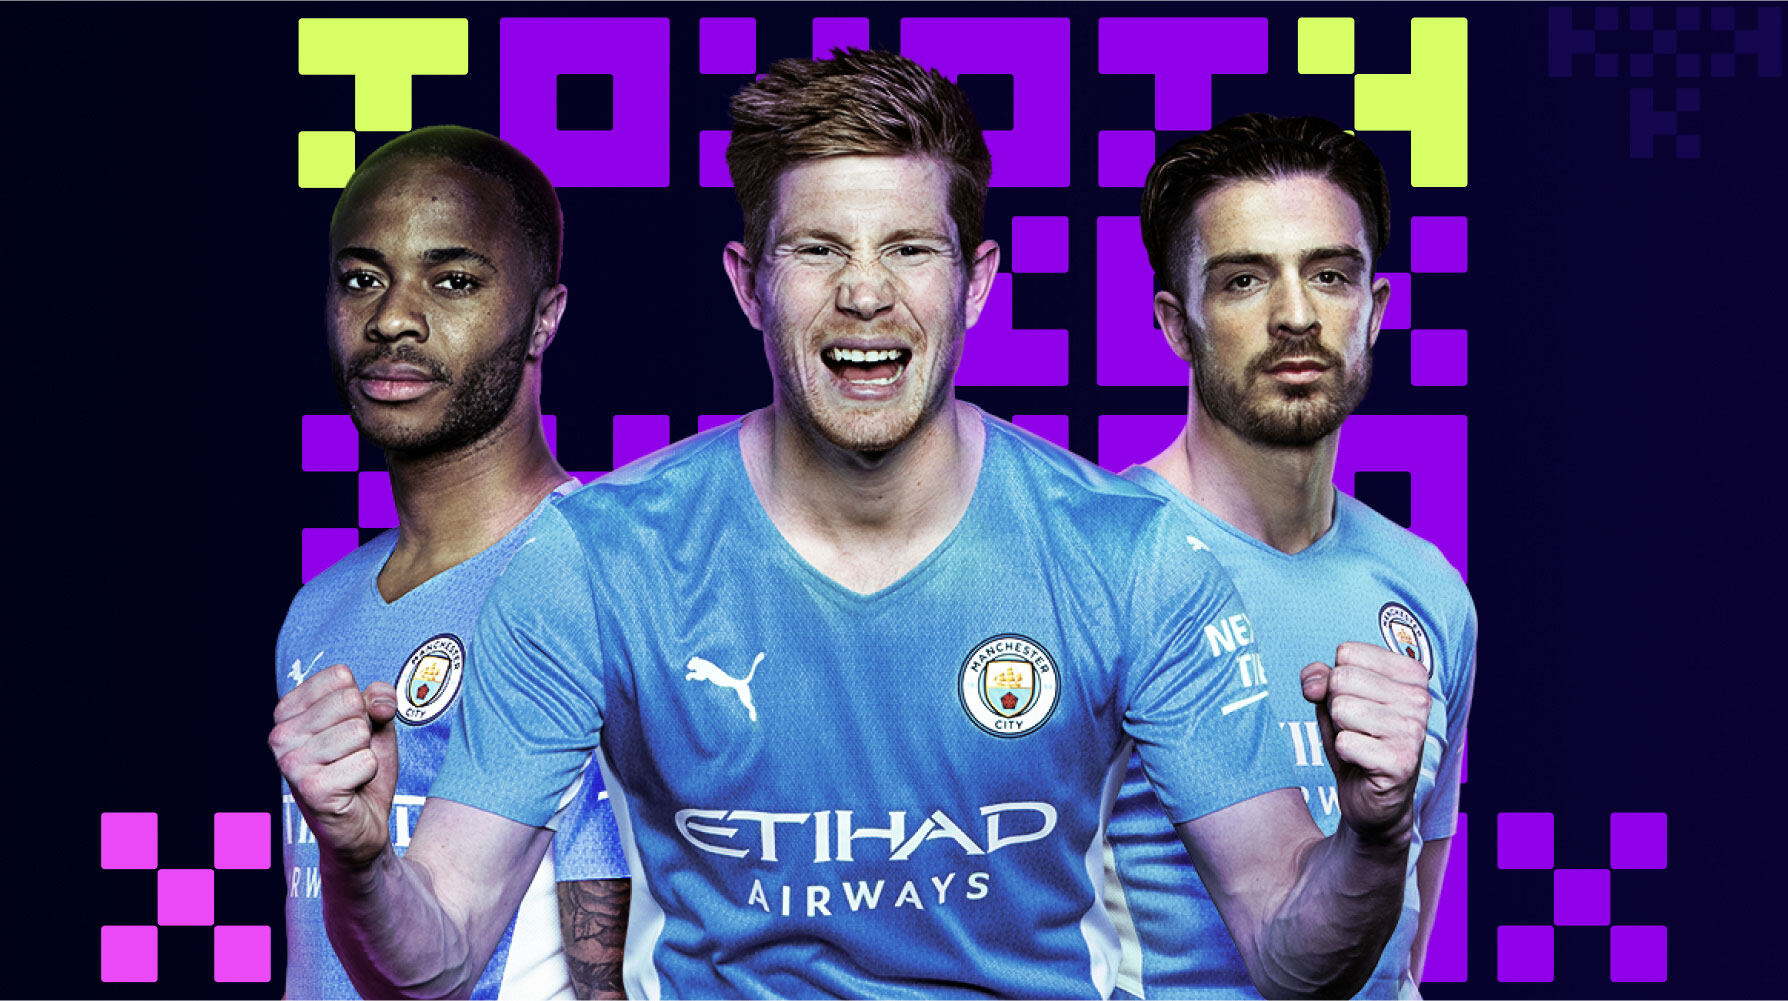 We’re teaming up with top football club Manchester City